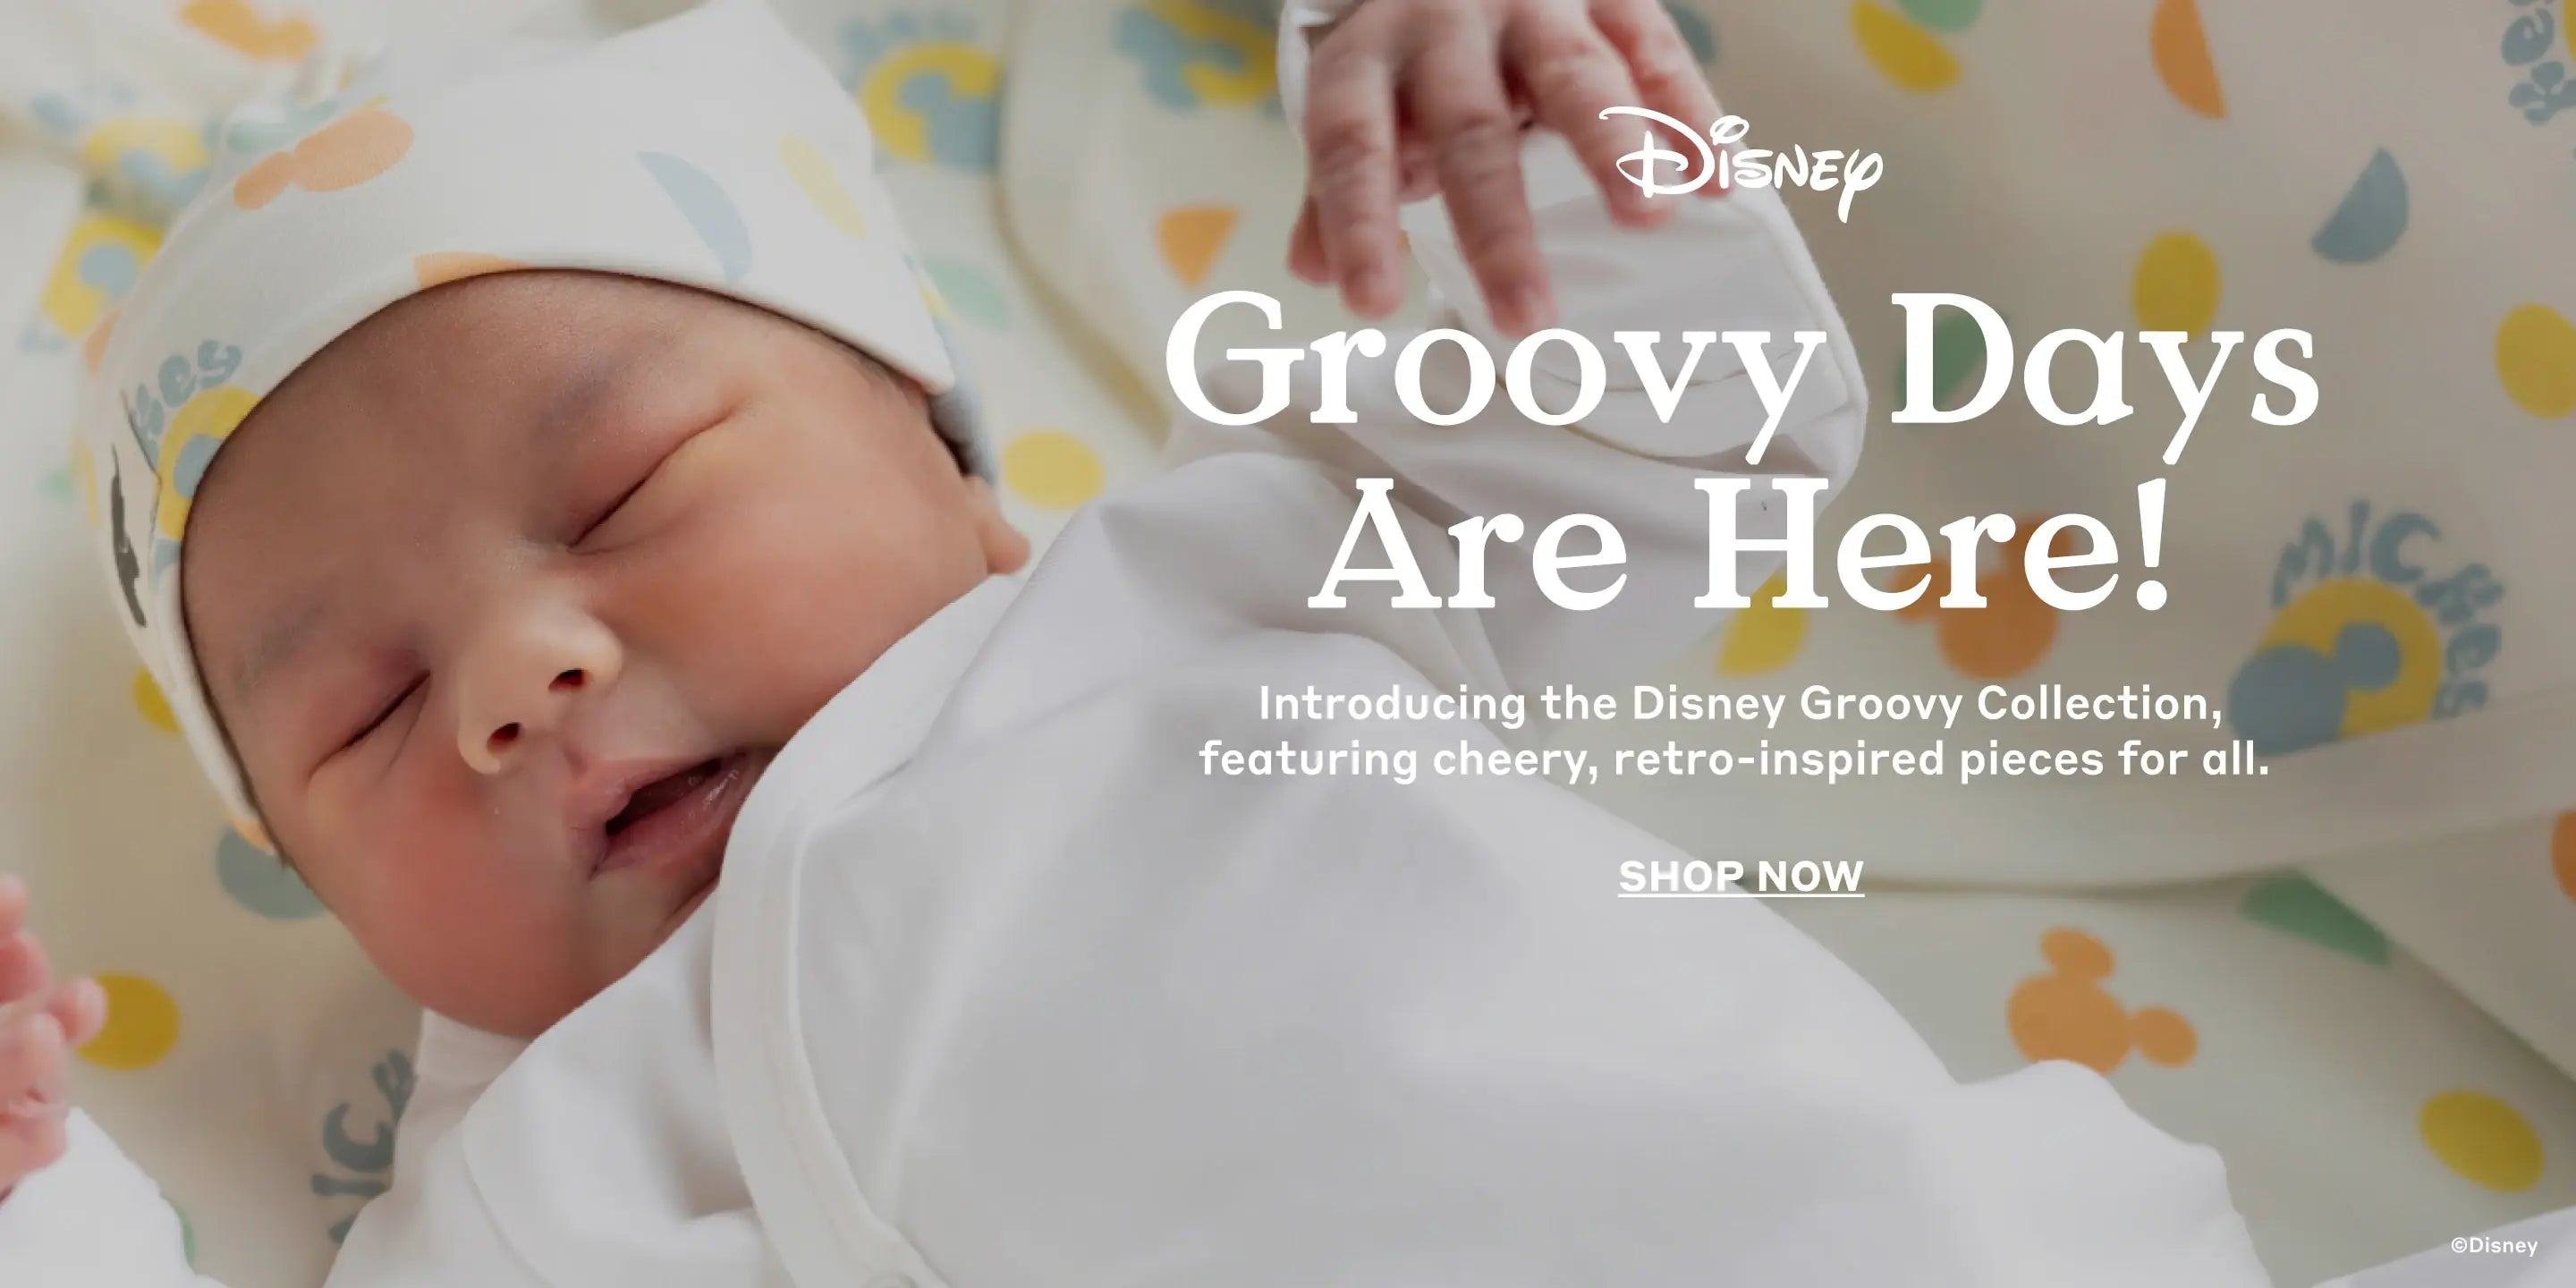 Hero banner with newborn in Disney Groovy print clothing and text: Groovy Days Are Here! Introducing the Disney Groovy Collection, featuring cheery, retro-inspired pieces for all - Shop Now